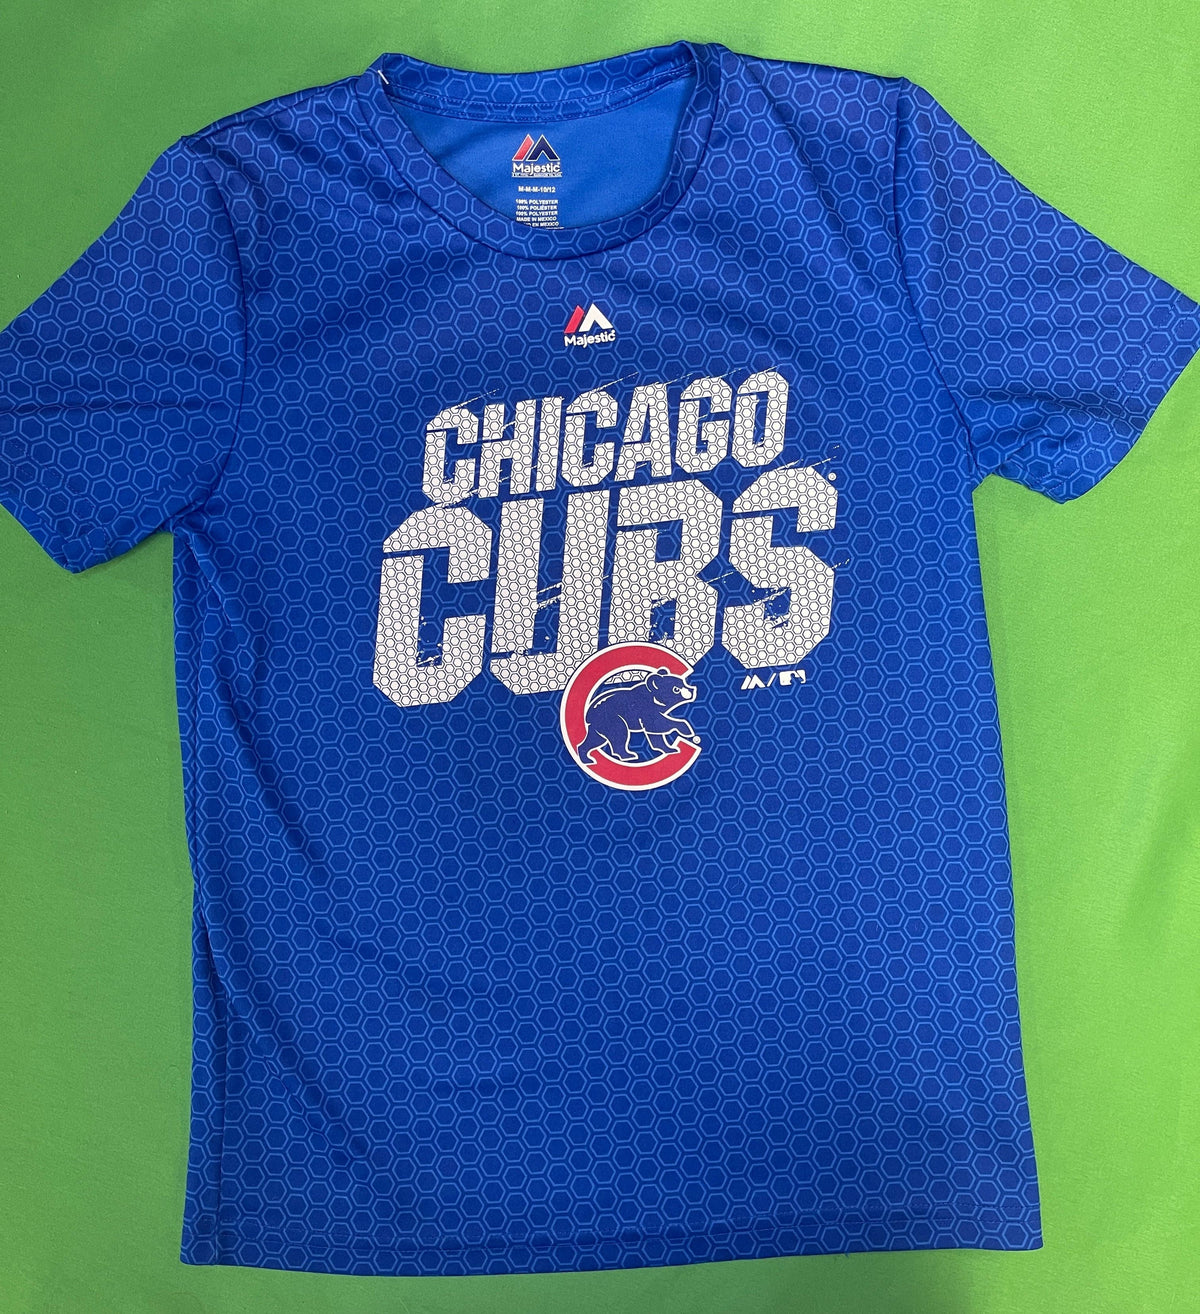 MLB Chicago Cubs Majestic Wicking-Style T-Shirt Youth Medium 10-12